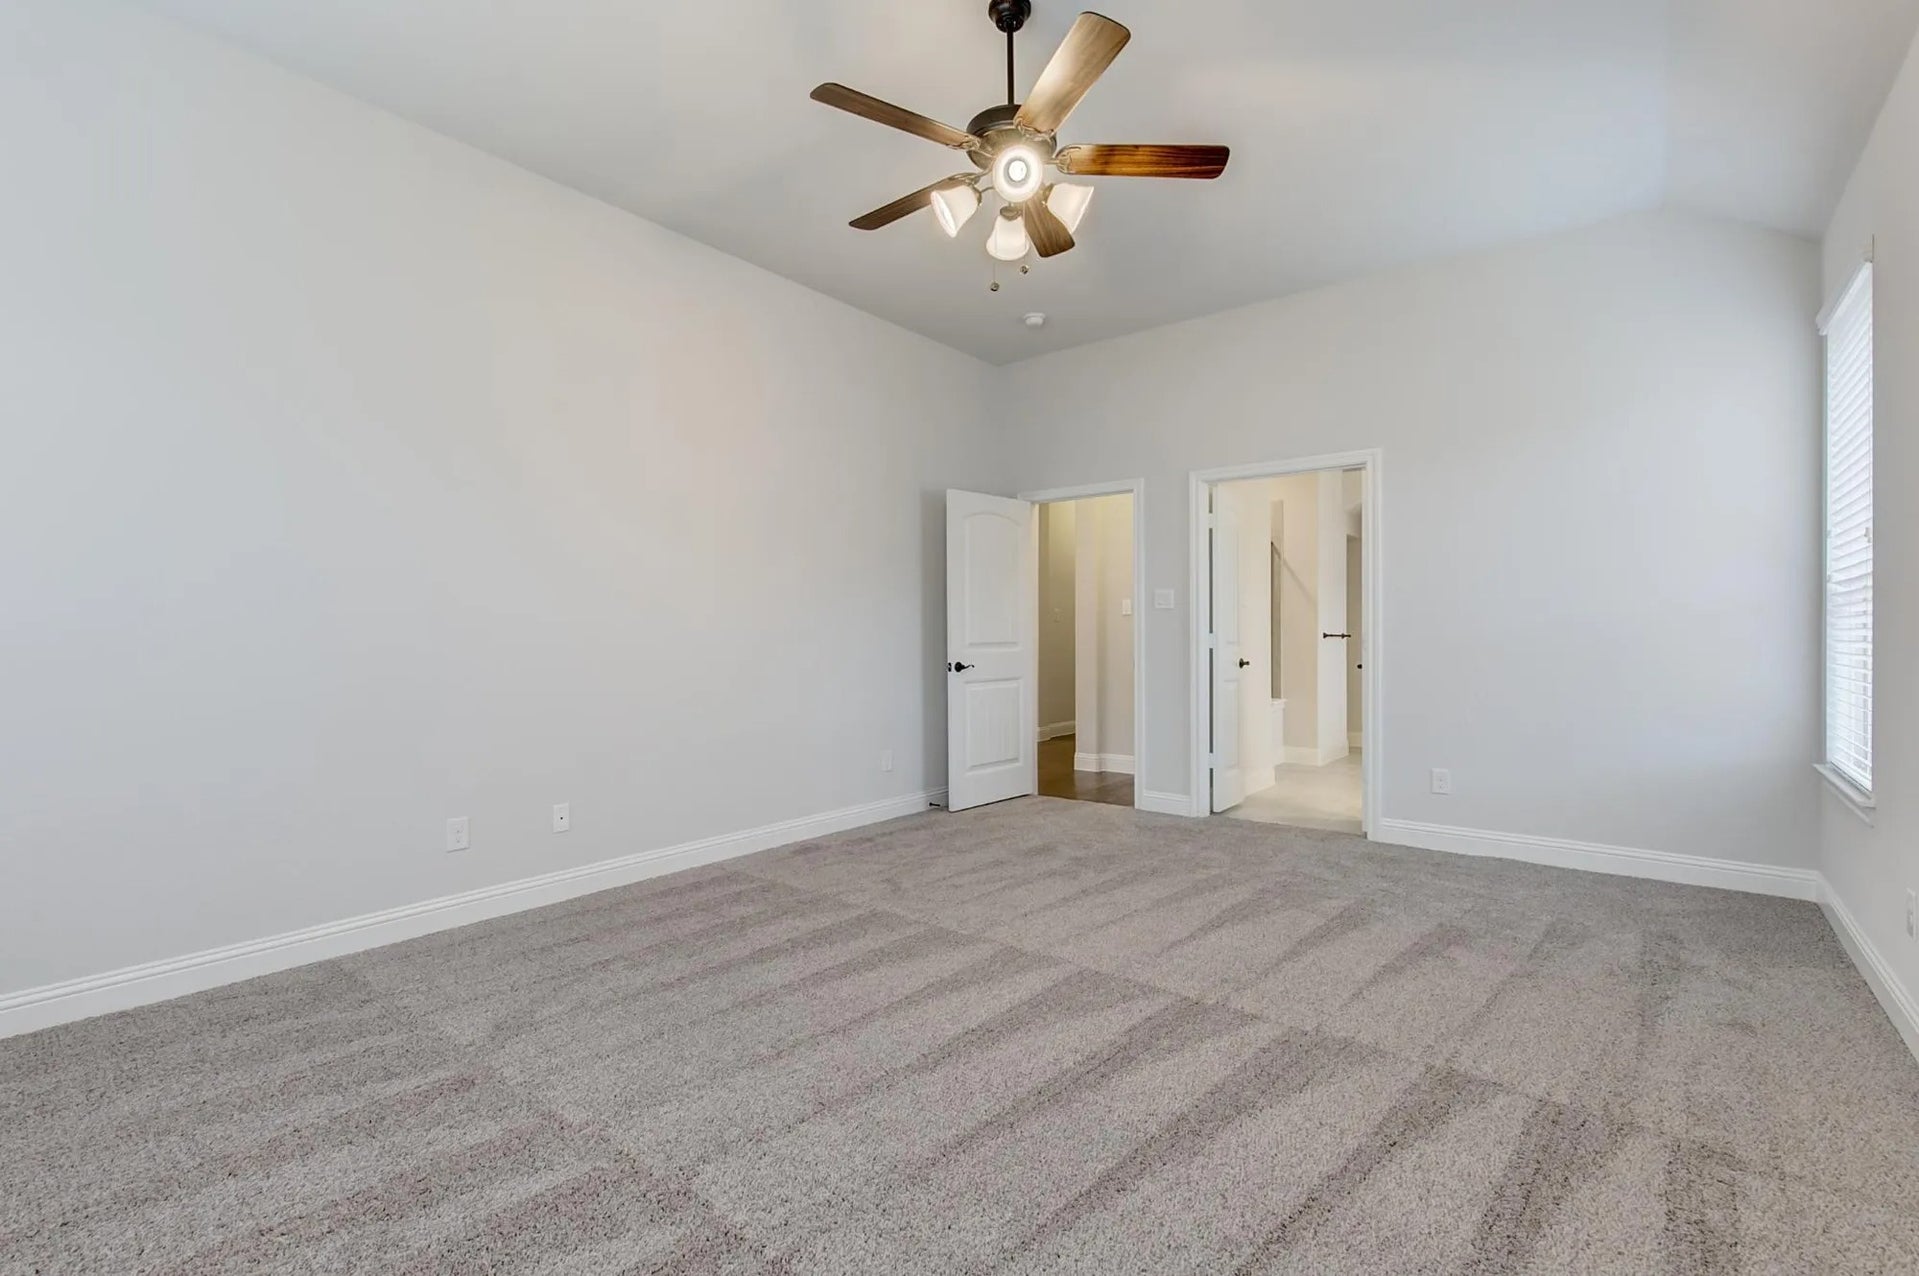 4br New Home in Burleson, TX